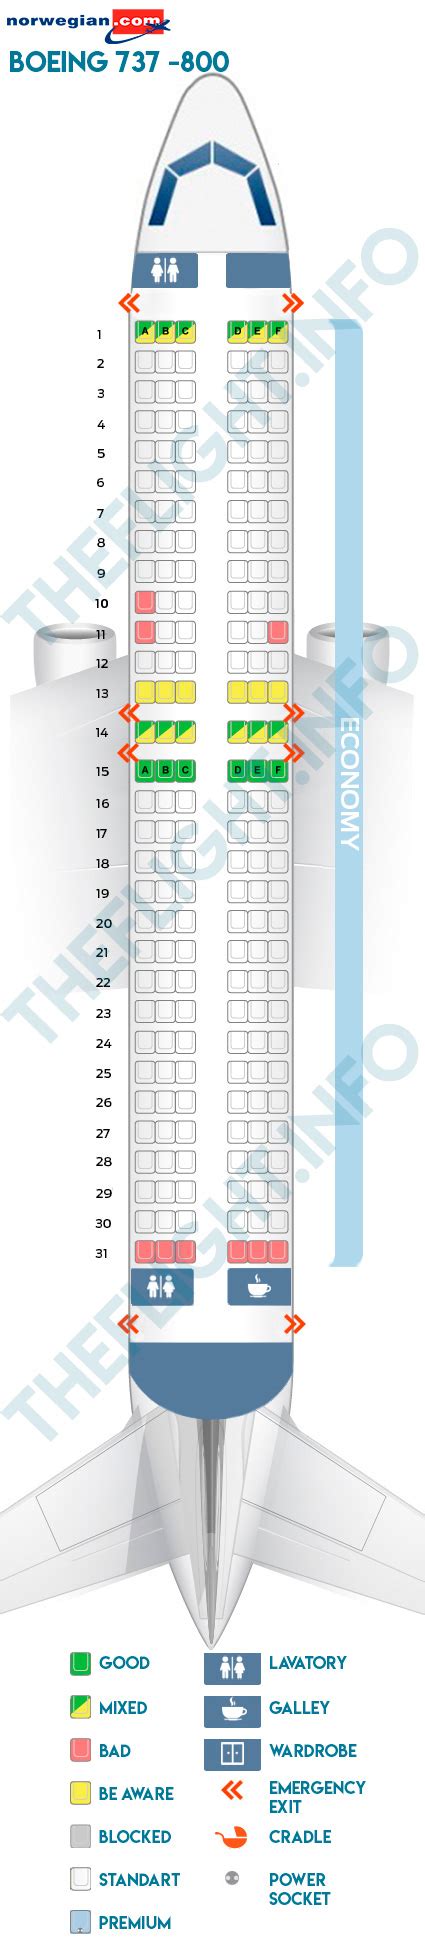 Boeing 737 800 Seating Chart Seat Map And Seating Chart Boeing 737